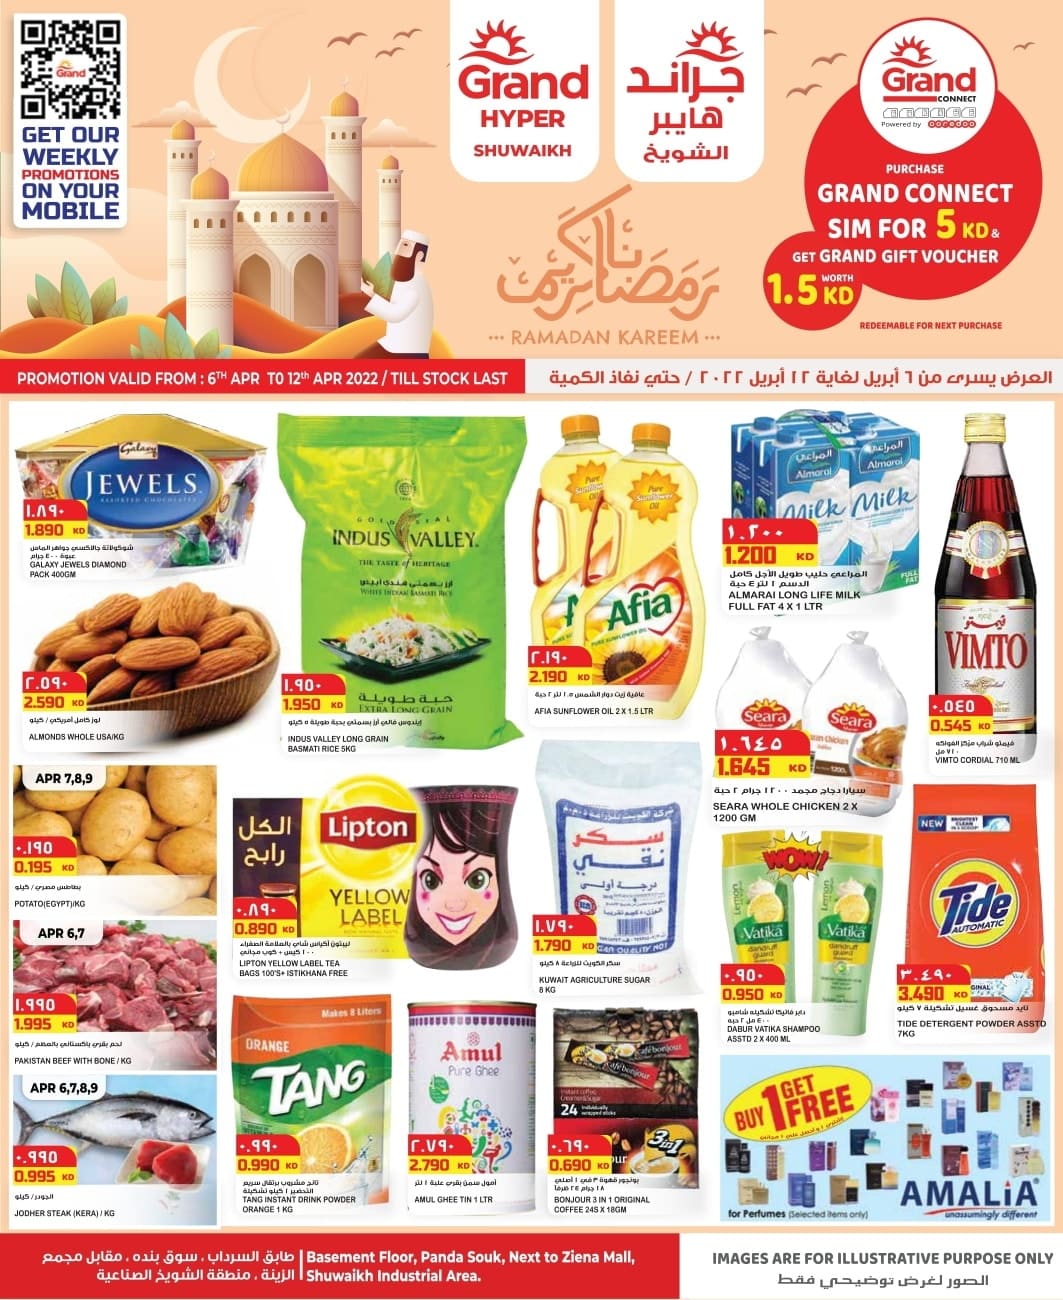 Grand Hyper special Ramadan promotions, iiQ8 offers in April 1